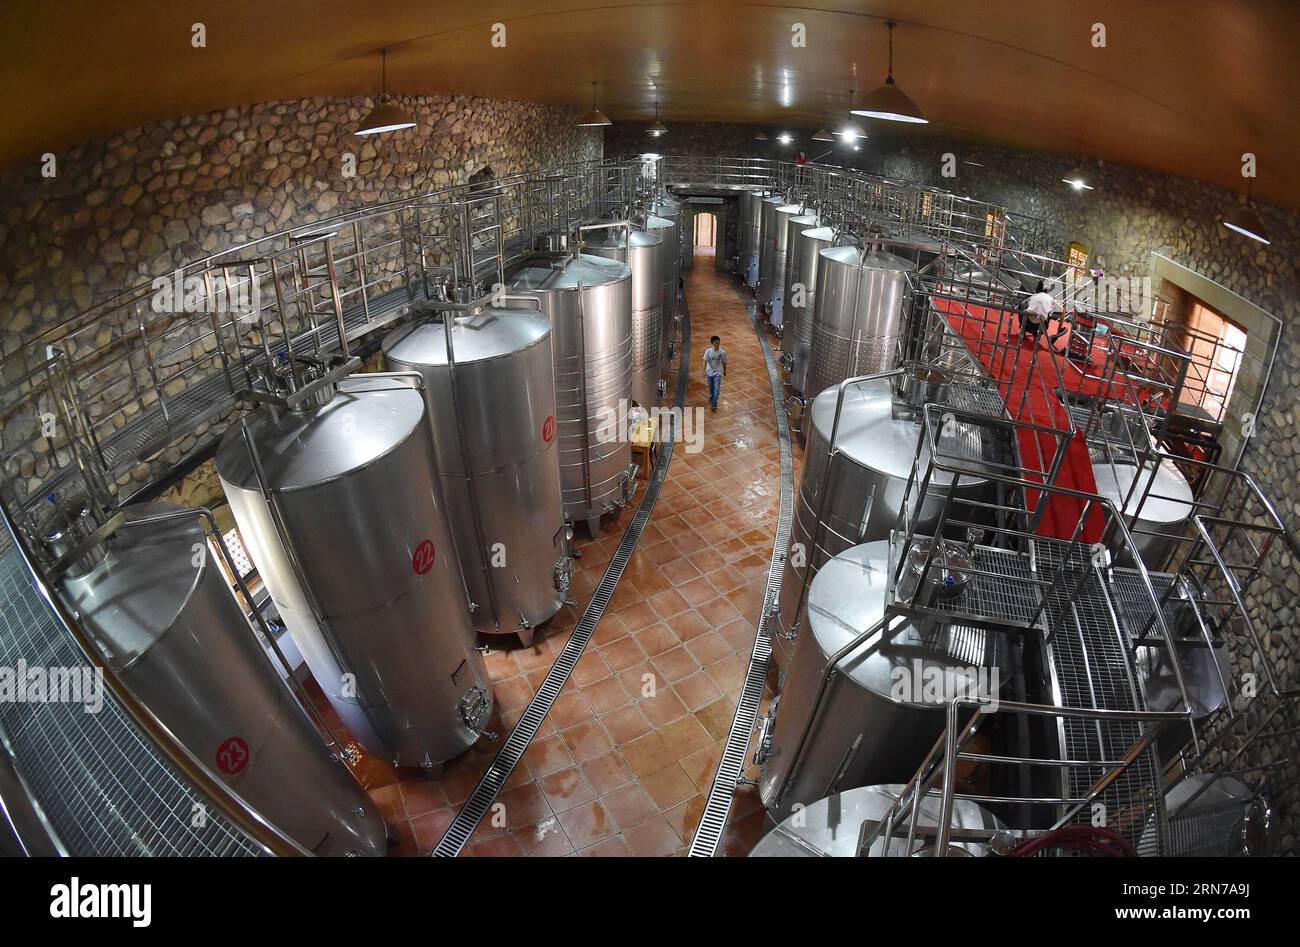 People work at a brewing workshop of Zhihui Yuanshi Chateau at the eastern foot of Helan Mountain, northwest China s Ningxia Hui Autonomous Region, Aug. 28, 2015. Many chateaus at the eastern foot of Helan Mountain, a golden belt for planting grapes, developed their tourism by attracting tourists with chateau cultures. Ningxia region, which has 590,000 mu (39,333 hectares) of vineyards, has planned to build 10 vineyard towns and more than 100 large-scale chateaus by 2020. ) (lfj) CHINA-NINGXIA-CHATEAU TOURISM (CN) LixRan PUBLICATIONxNOTxINxCHN   Celebrities Work AT a Brewing Workshop of Zhihui Stock Photo